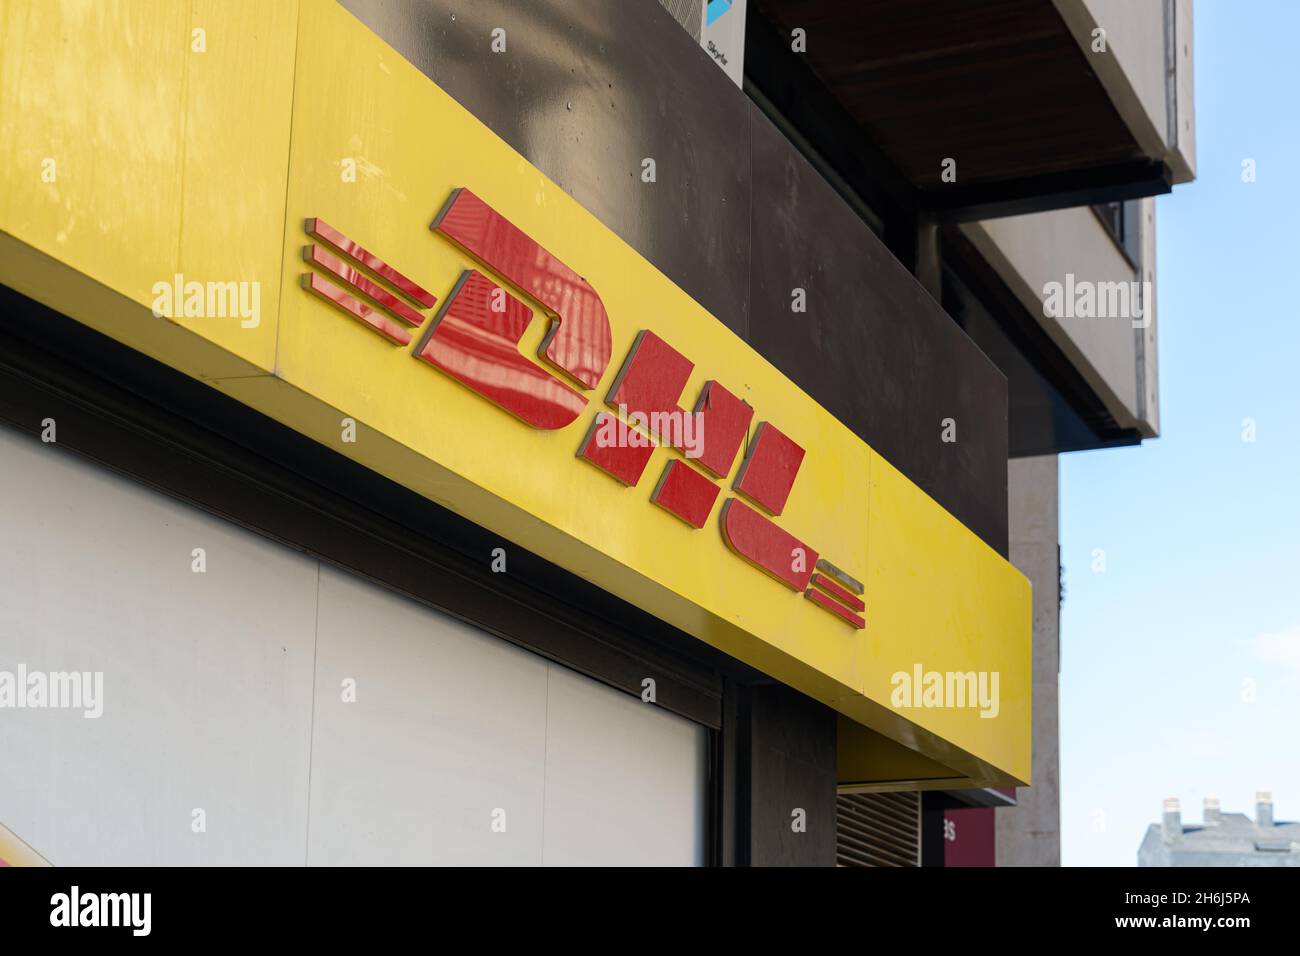 VALENCIA, SPAIN - NOVEMBER 15, 2021: DHL is an international courier, package delivery and express mail service Stock Photo